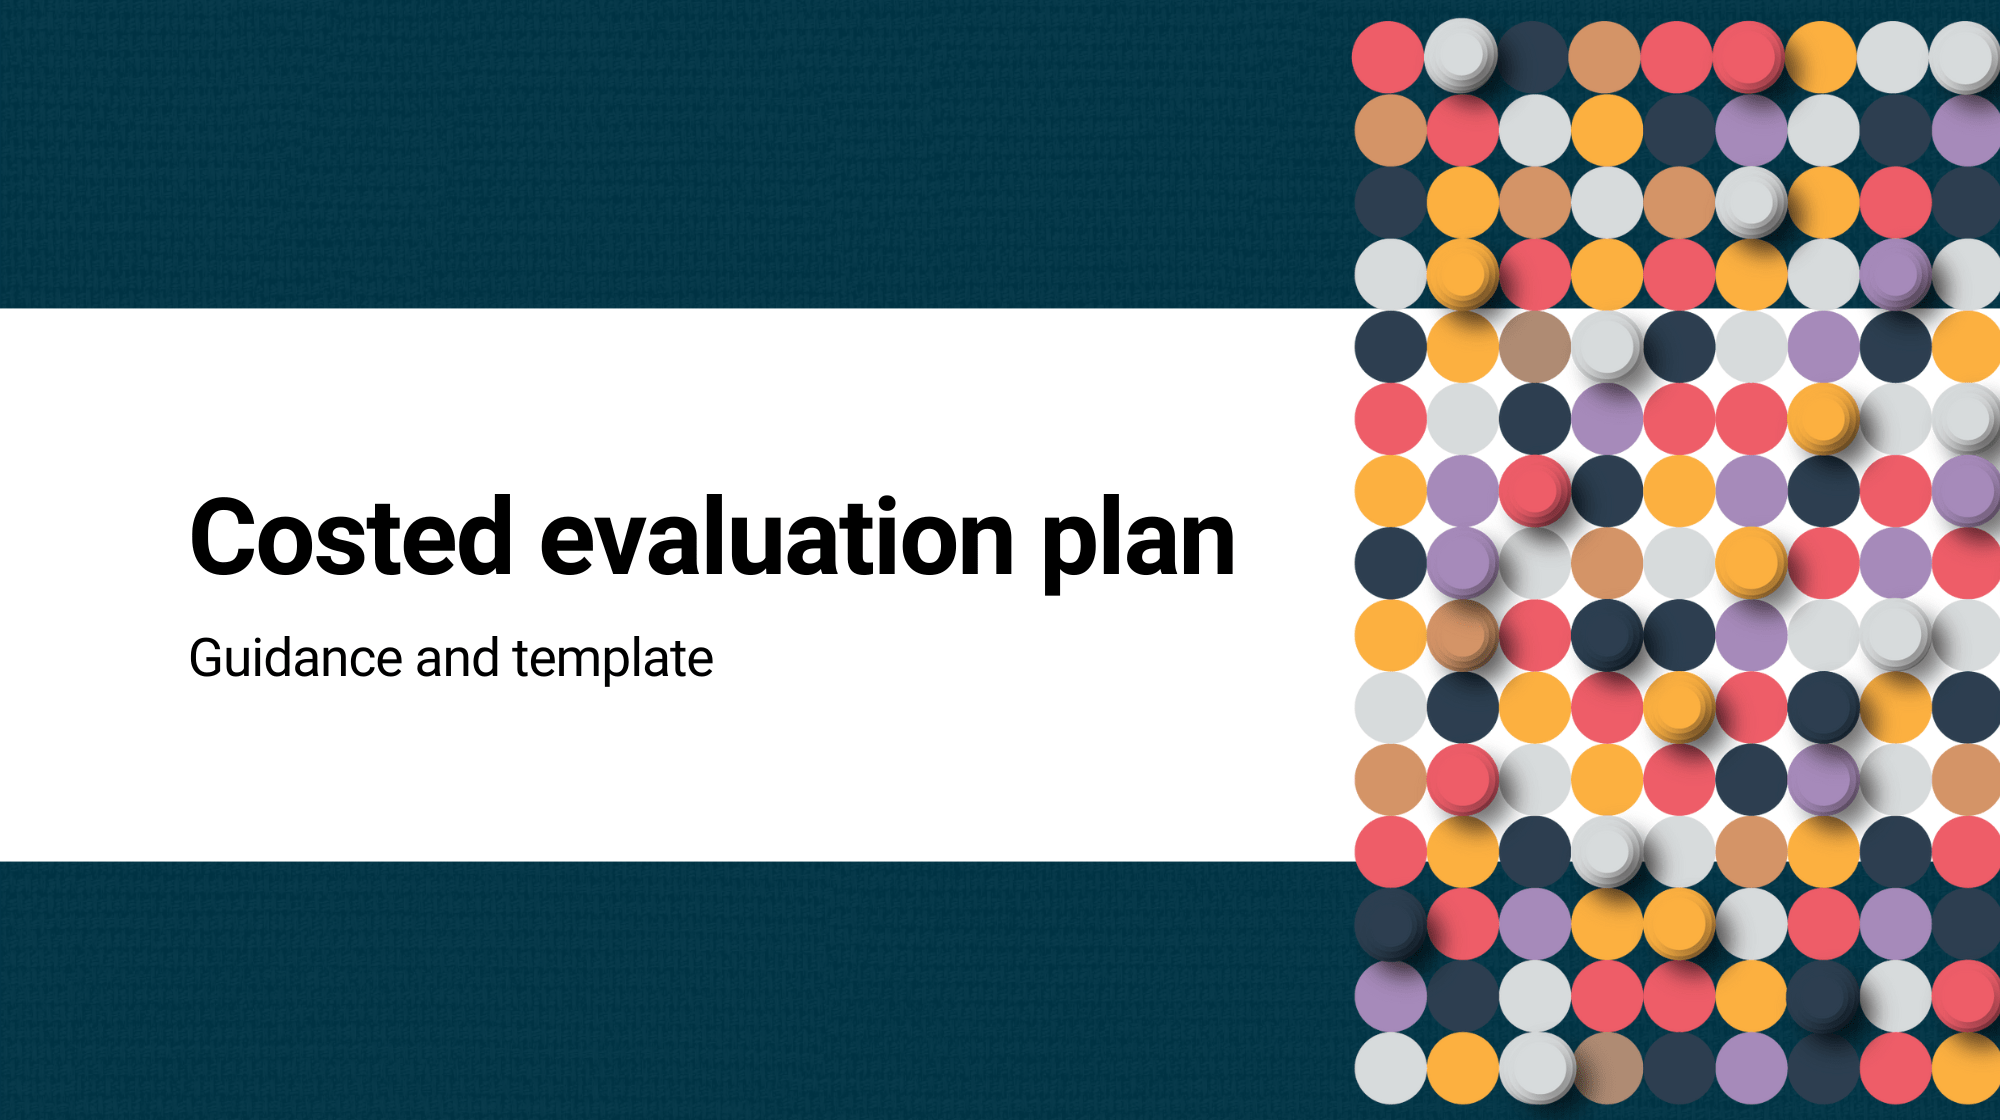 Costed evaluation plan guidance and template